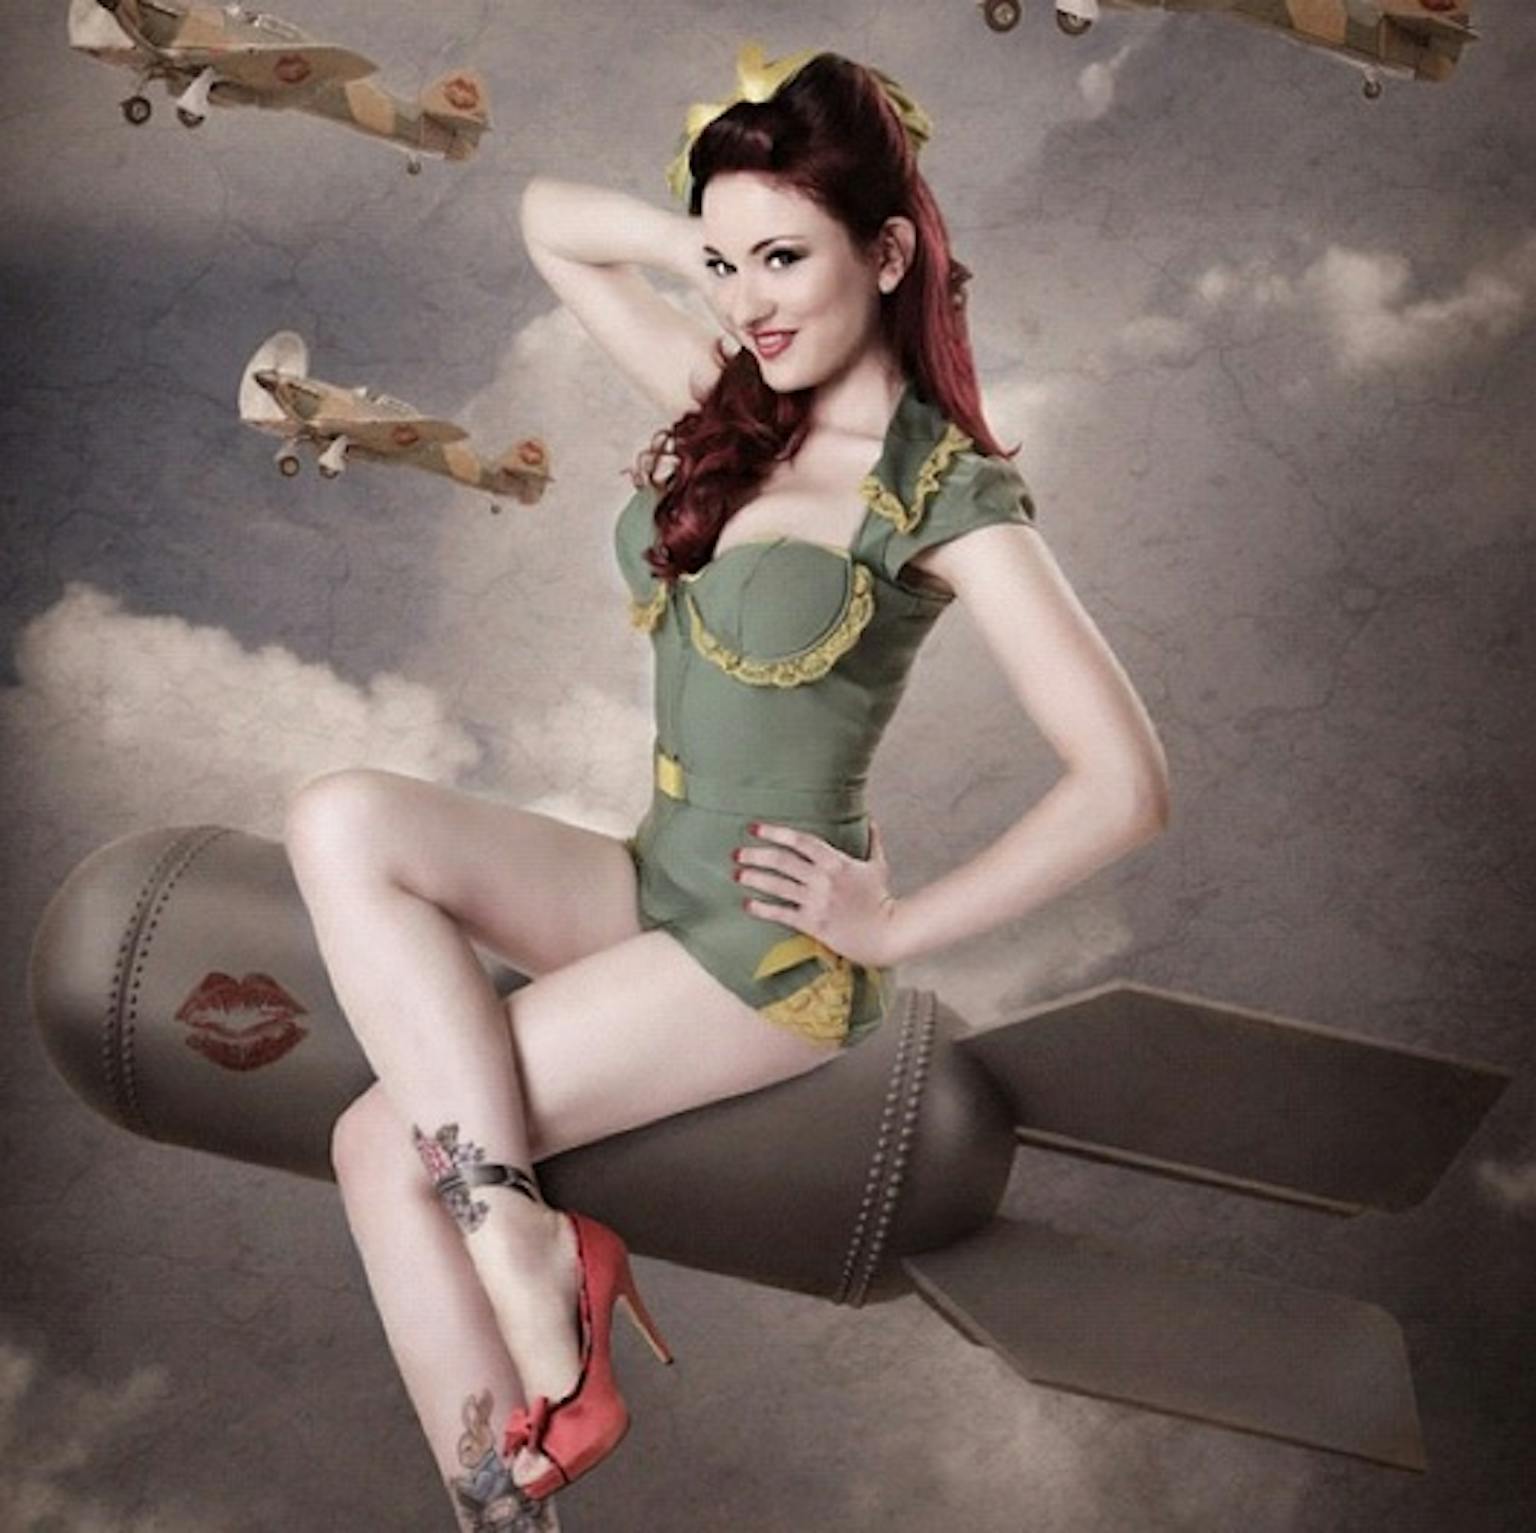 5 modernday pinup models making the most of Instagram The Daily Dot